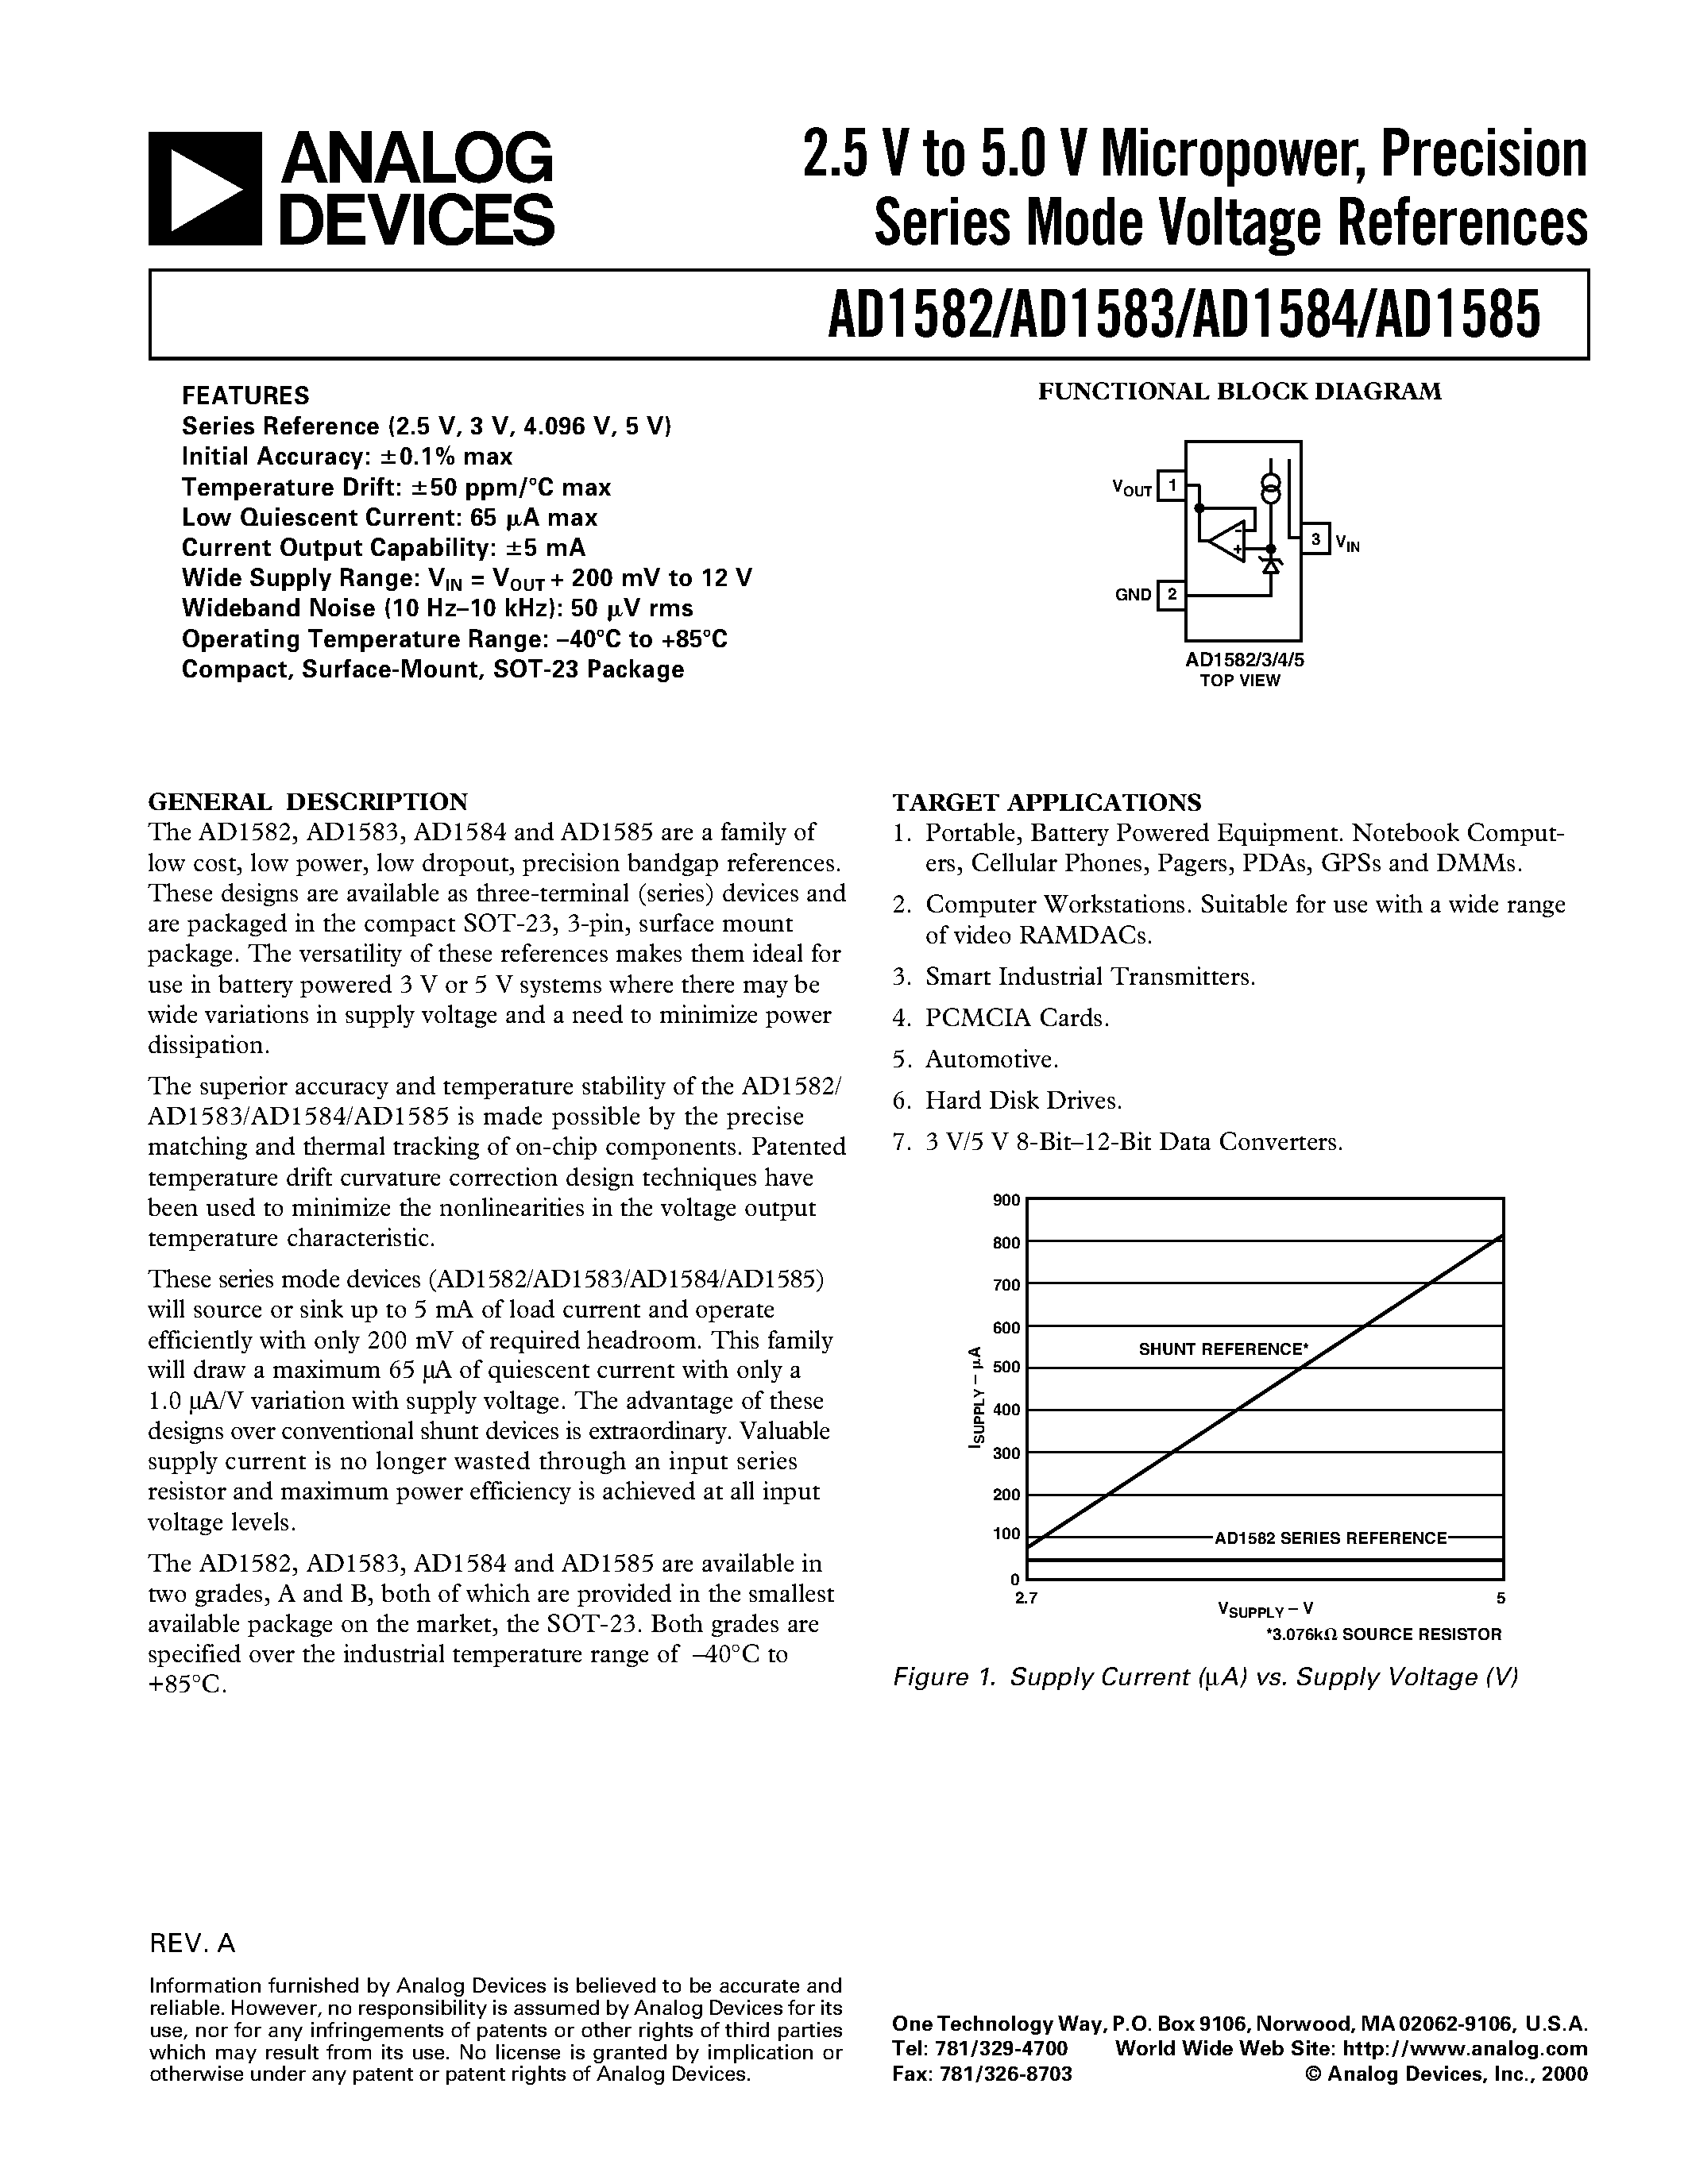 Datasheet AD1585B - 2.5 V to 5.0 V Micropower/ Precision Series Mode Voltage References page 1